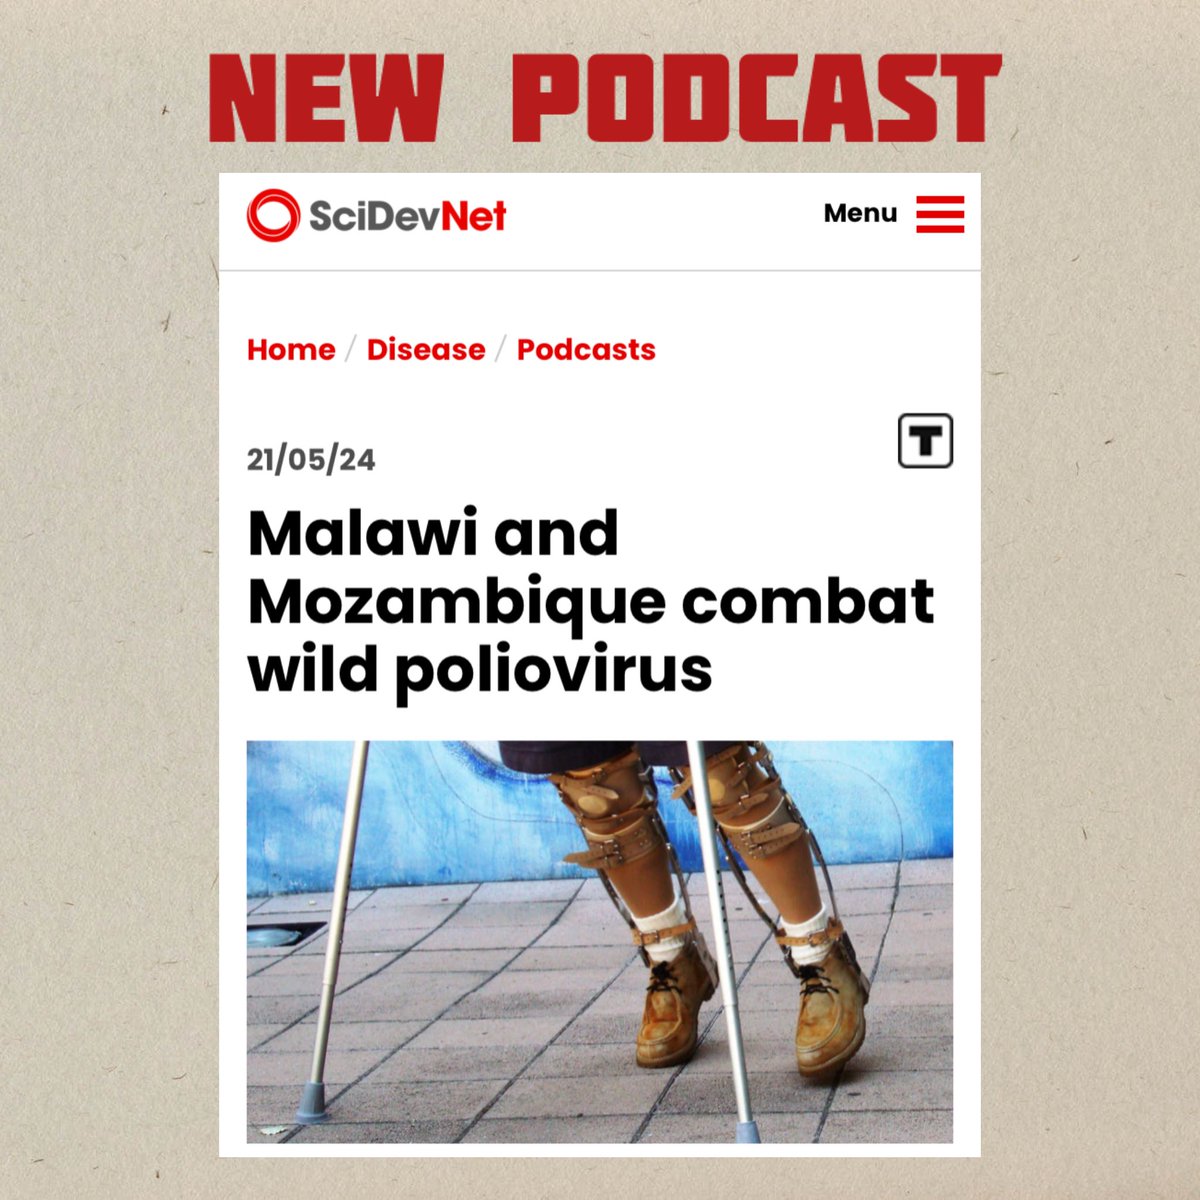 After Africa achieved wild poliovirus-free status in 2020, the region experienced recurring outbreaks in Mozambique & Malawi in 2022 In this episode, public health experts uncover d strategies Southern African countries adopted to fight the virus LISTEN: scidev.net/global/disease…